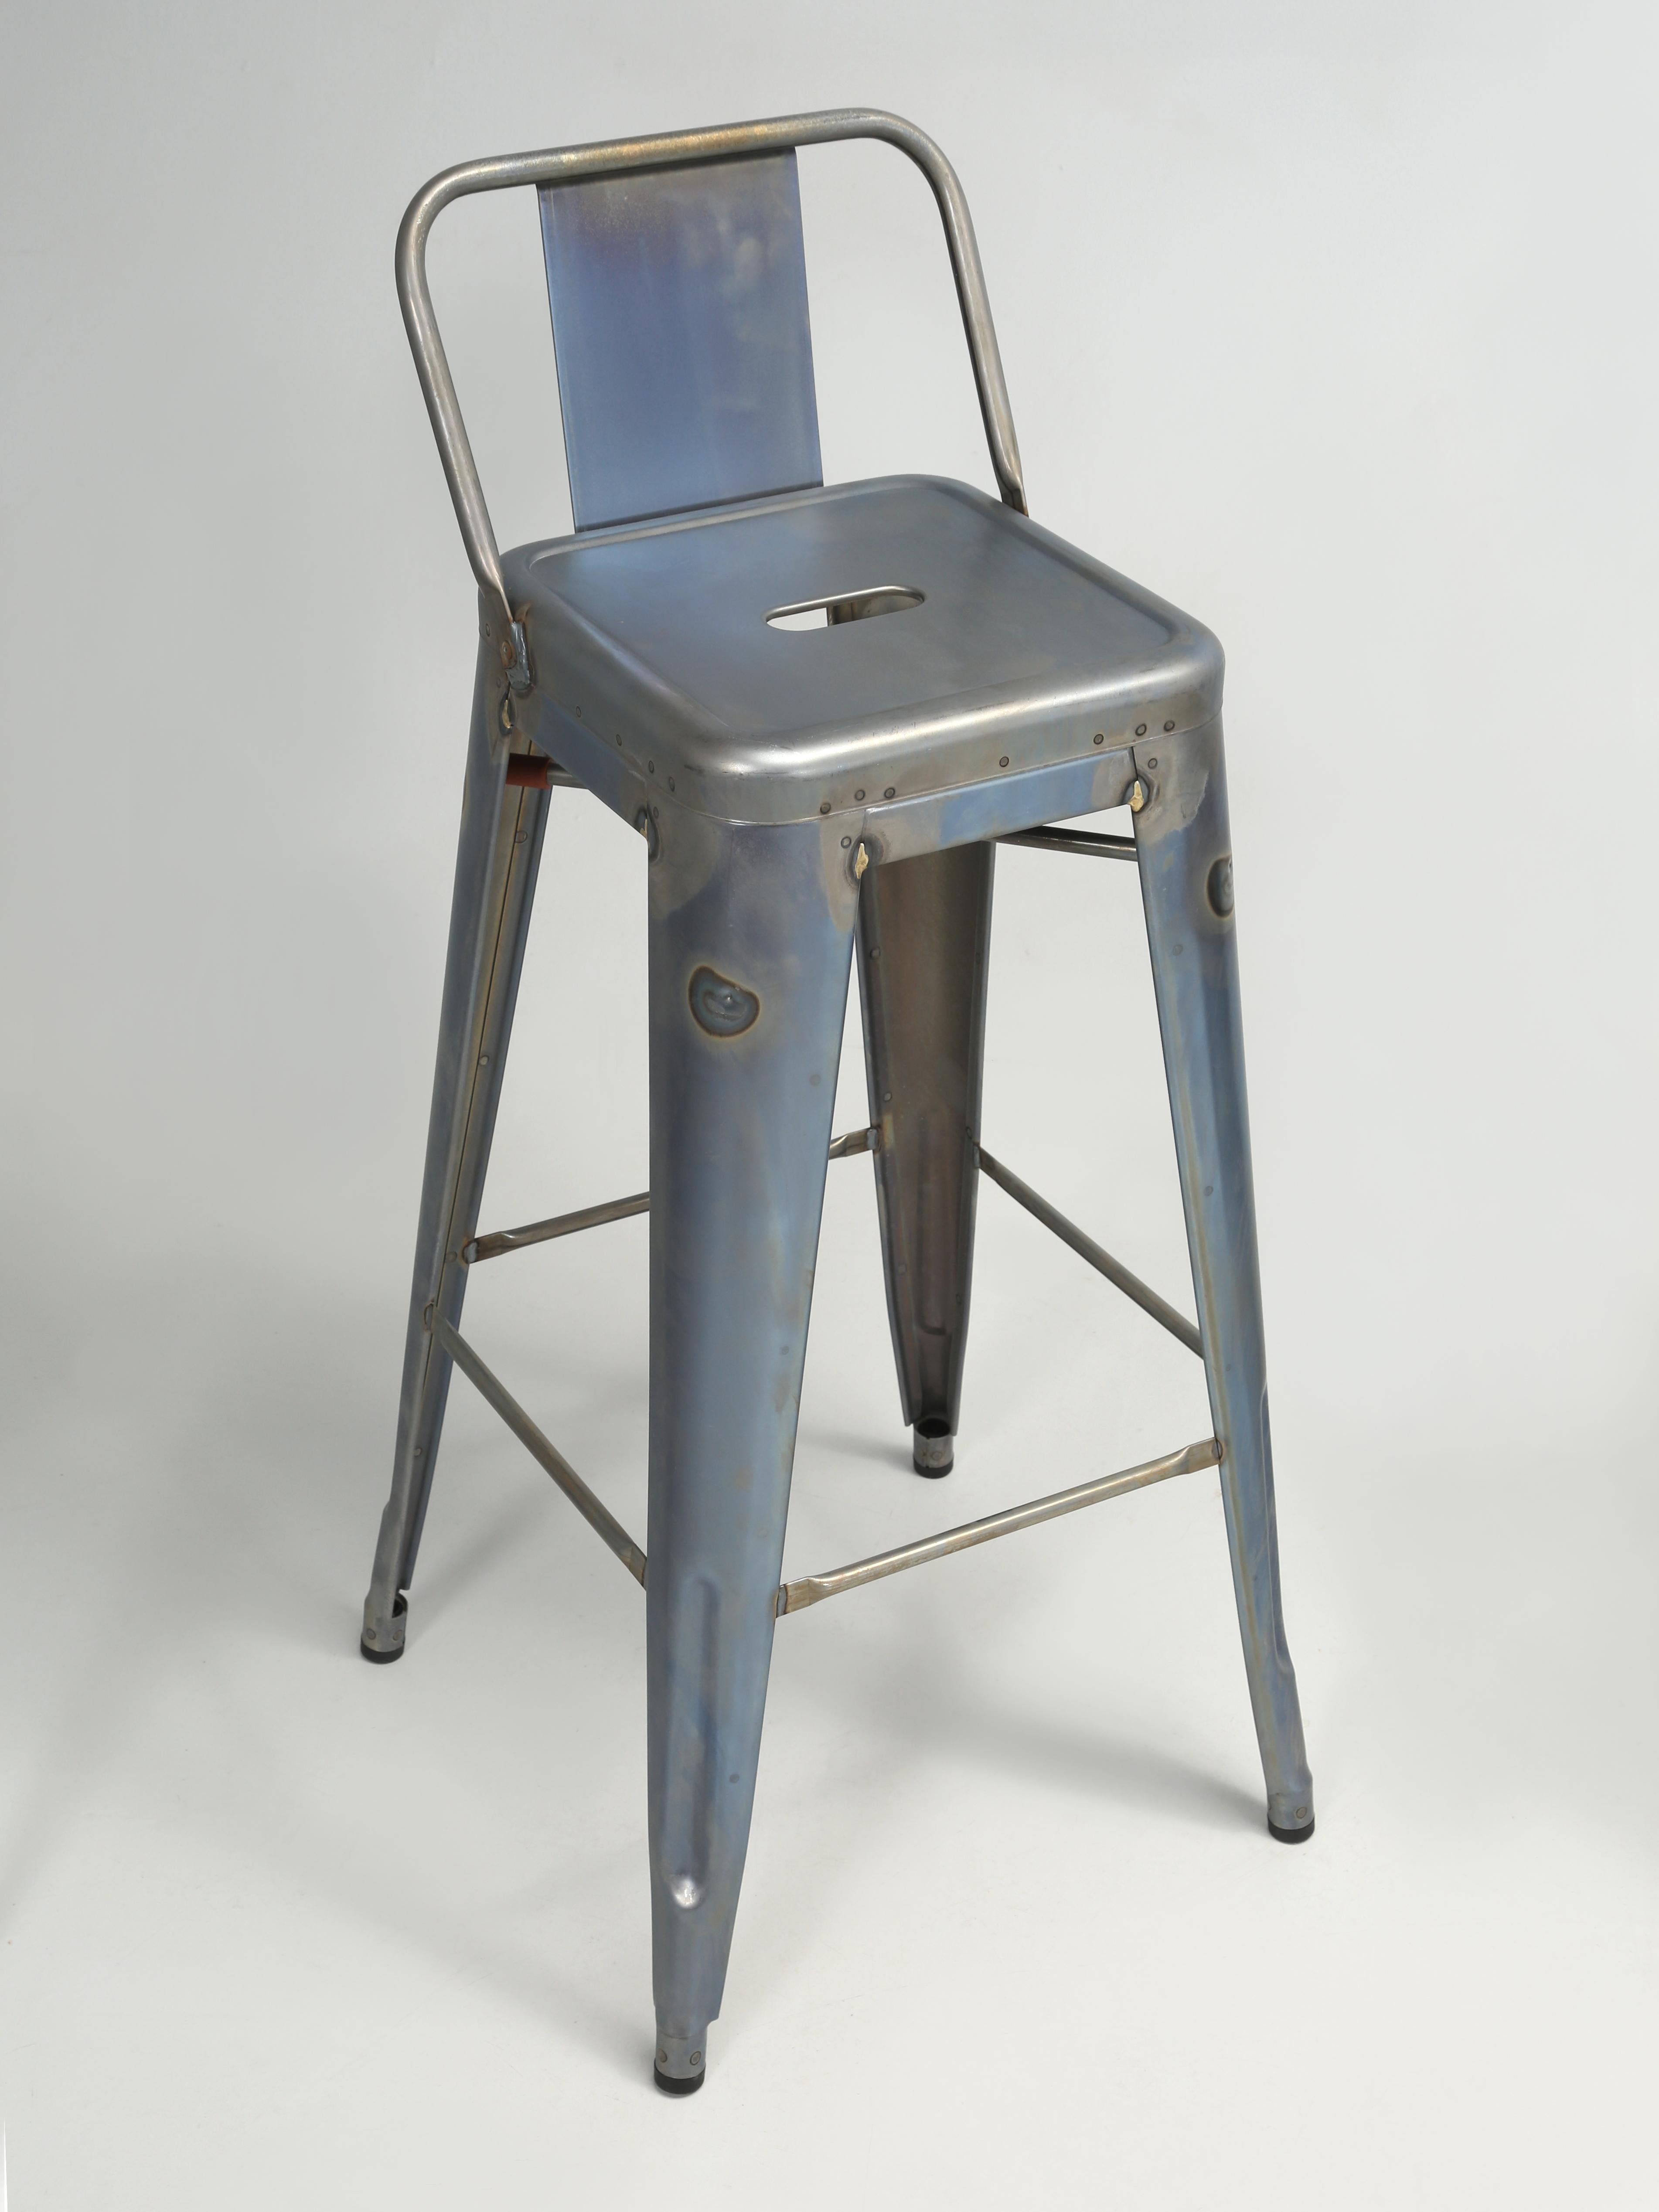 Tolix Bar-Height Steel Stools with the Tolix low back in Raw Steel ready to paint or lease as is. They have a blue-wash preventative rust coating as applied by Tolix in France. We currently stock over (1300) pieces of Authentic French Made Tolix in